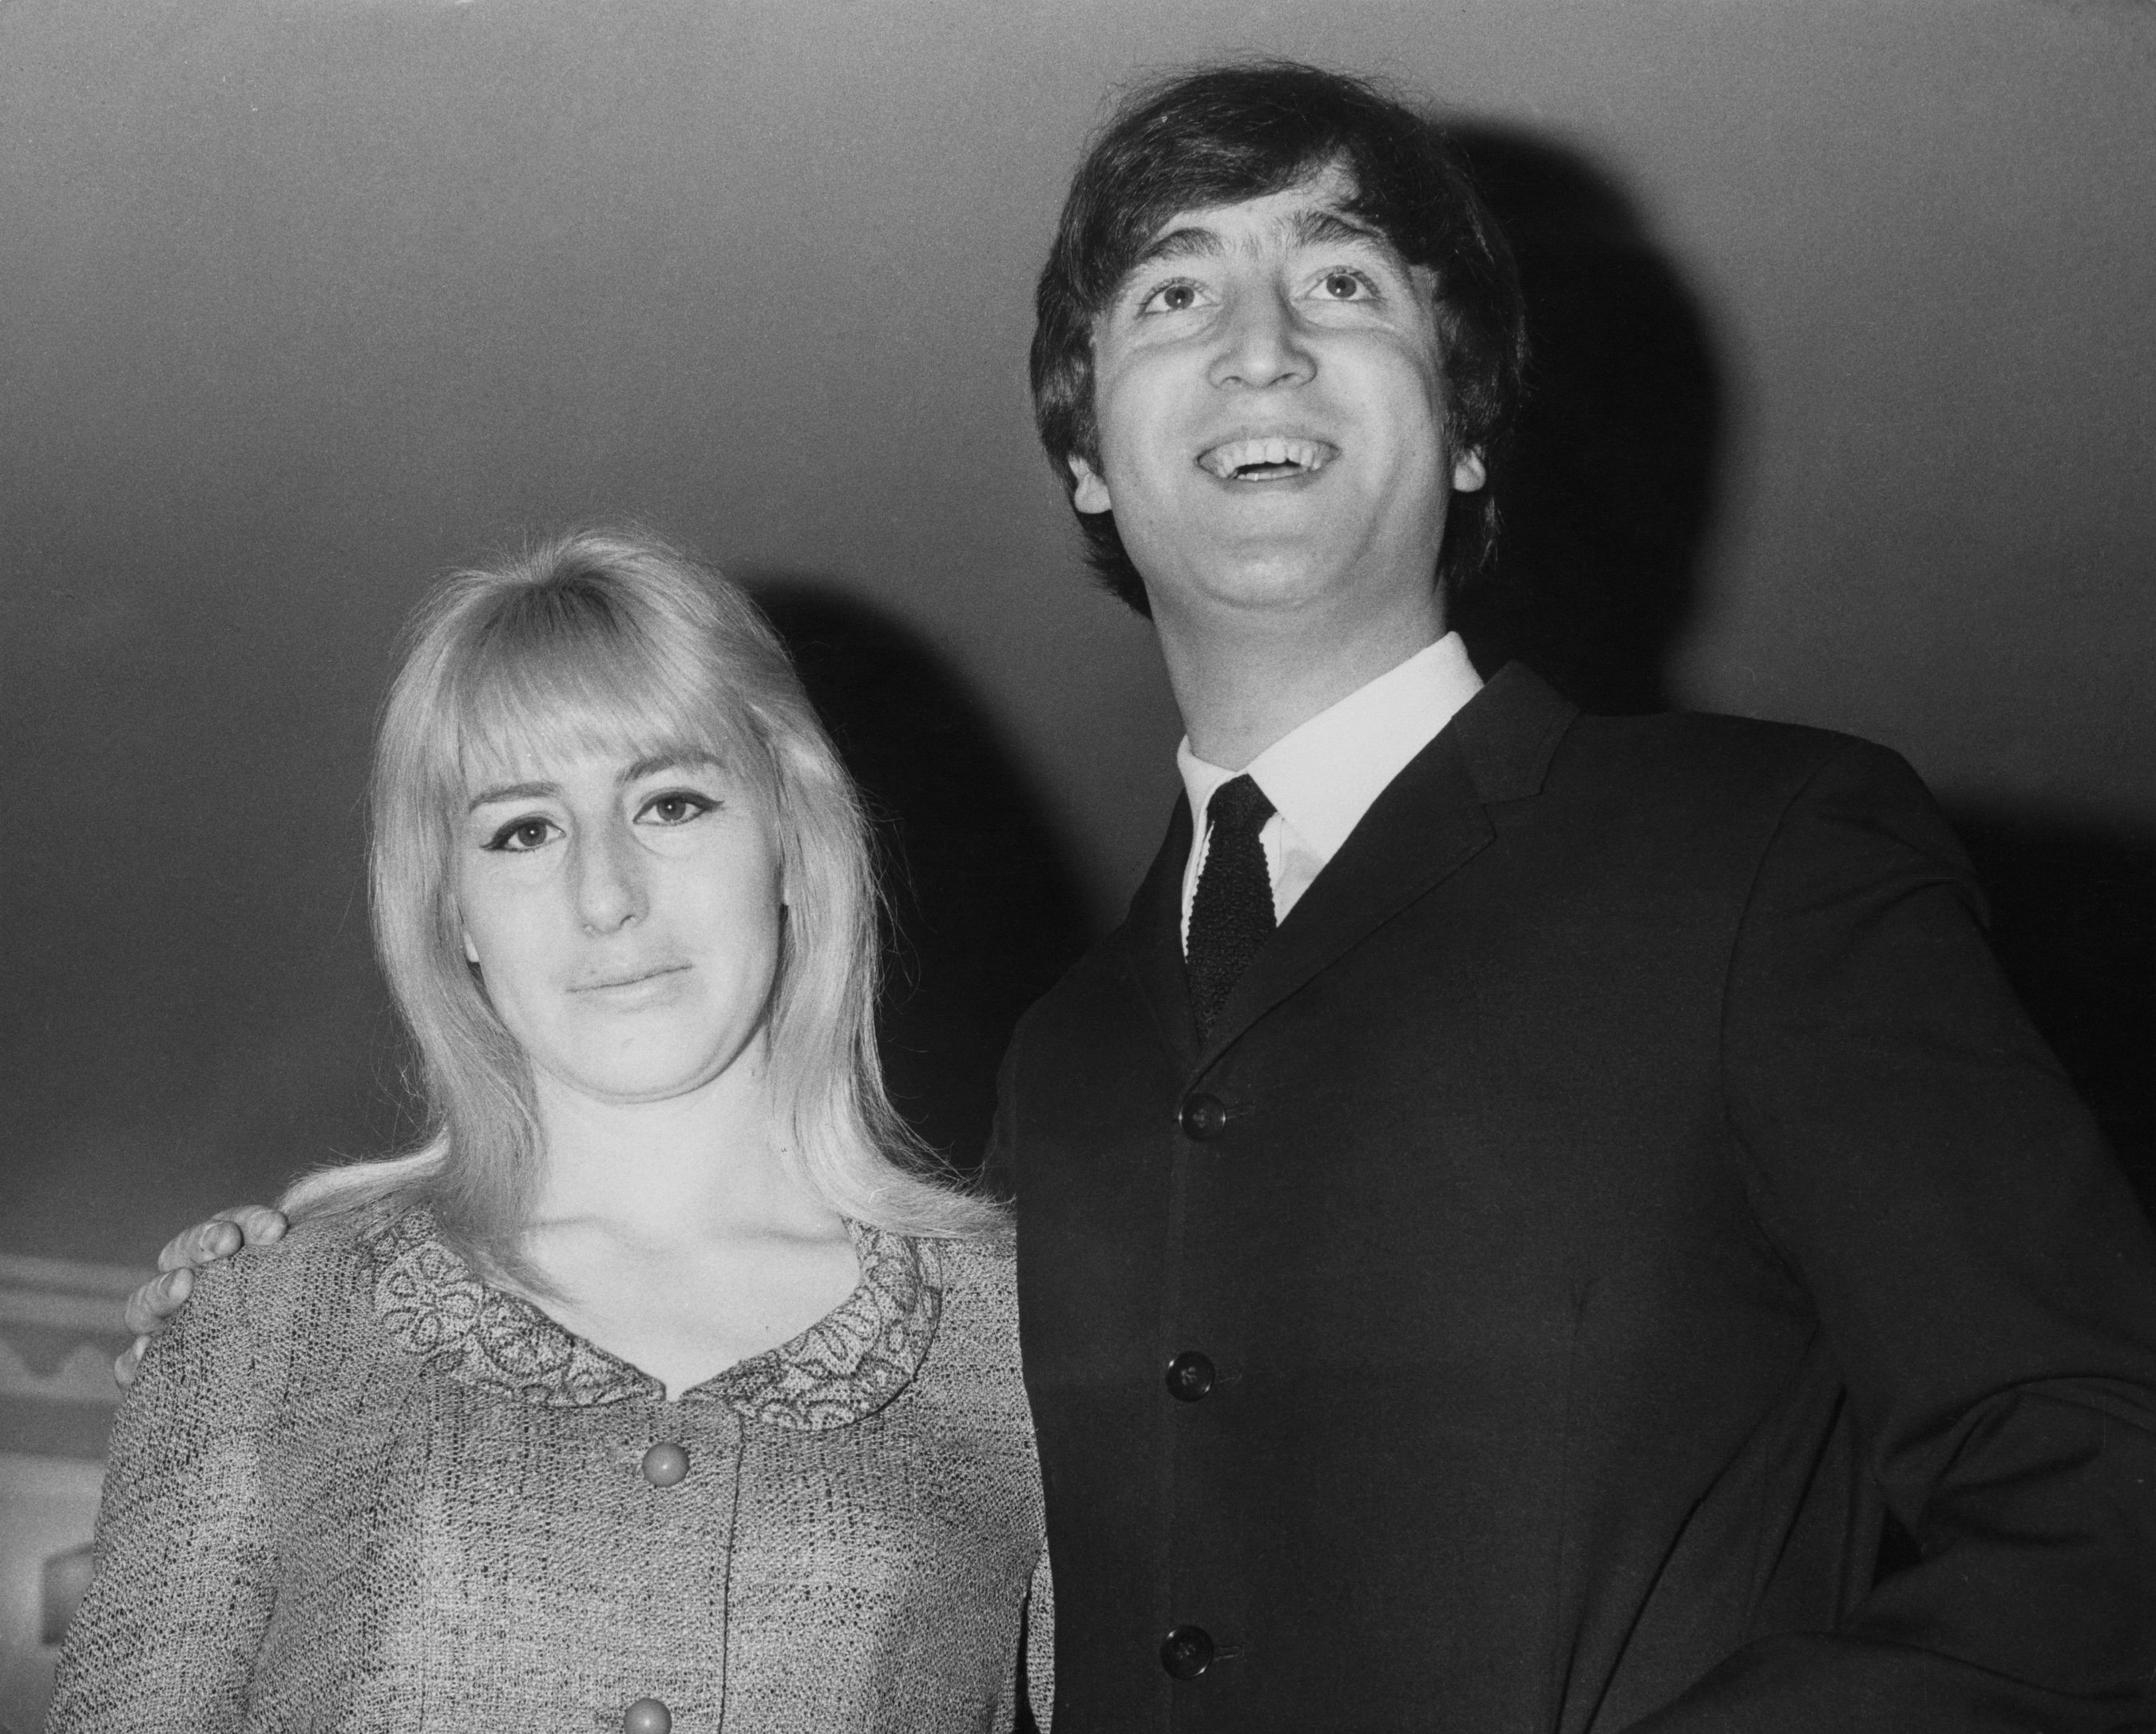 Musician, singer and songwriter John Lennon (1940 - 1980) of British rock group the Beatles with his first wife Cynthia 